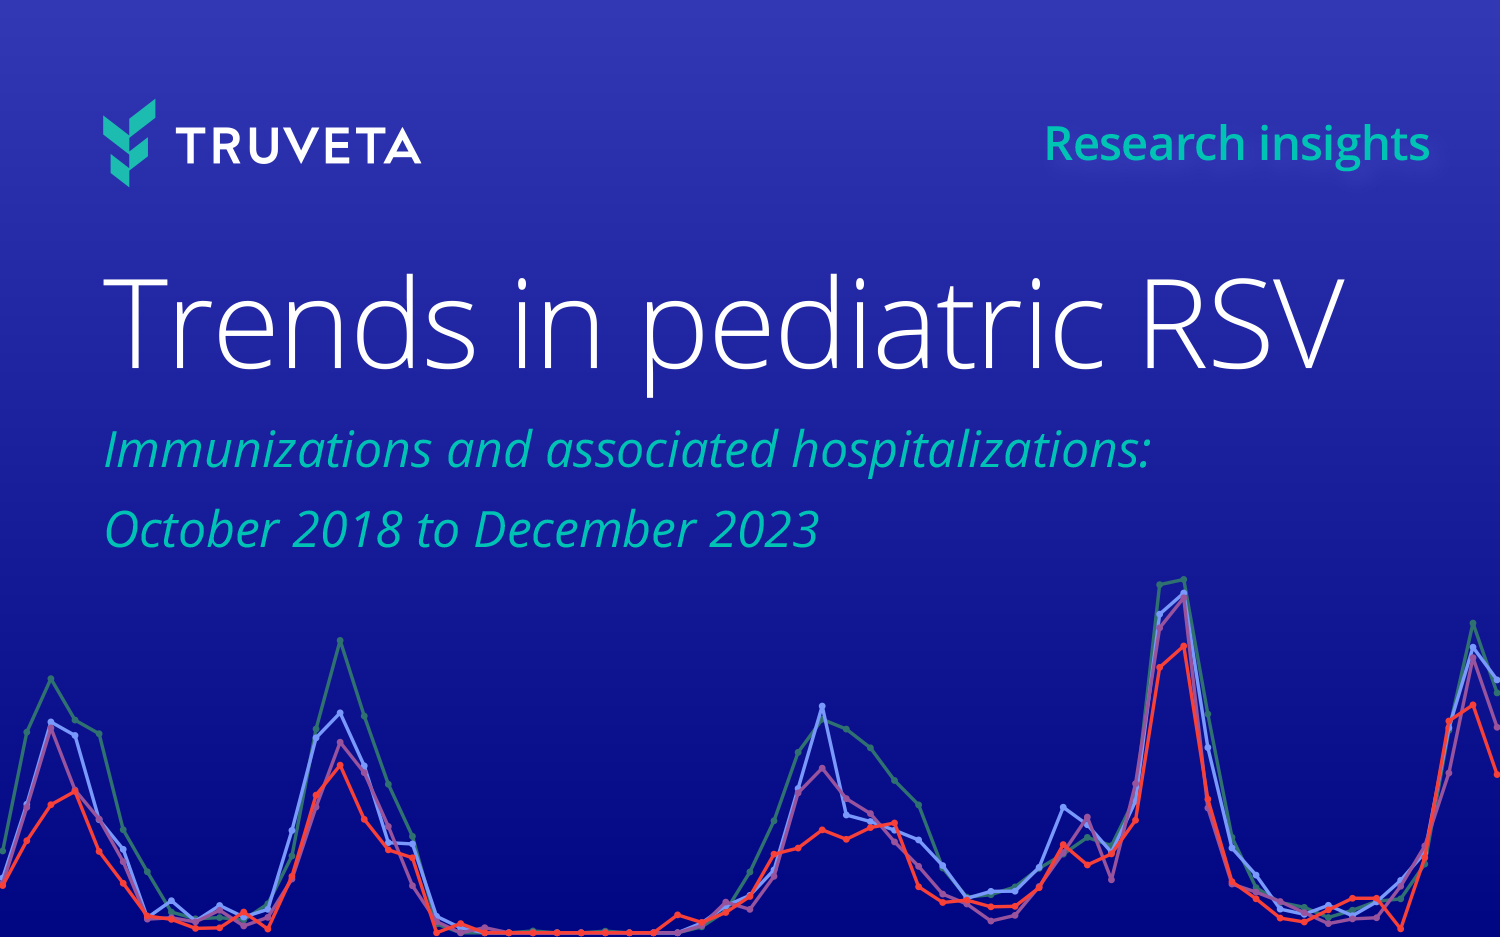 Truveta Research uses EHR data to show the trends in pediatric RSV-associated hospitalizations and the uptake in pediatric RSV immunizations